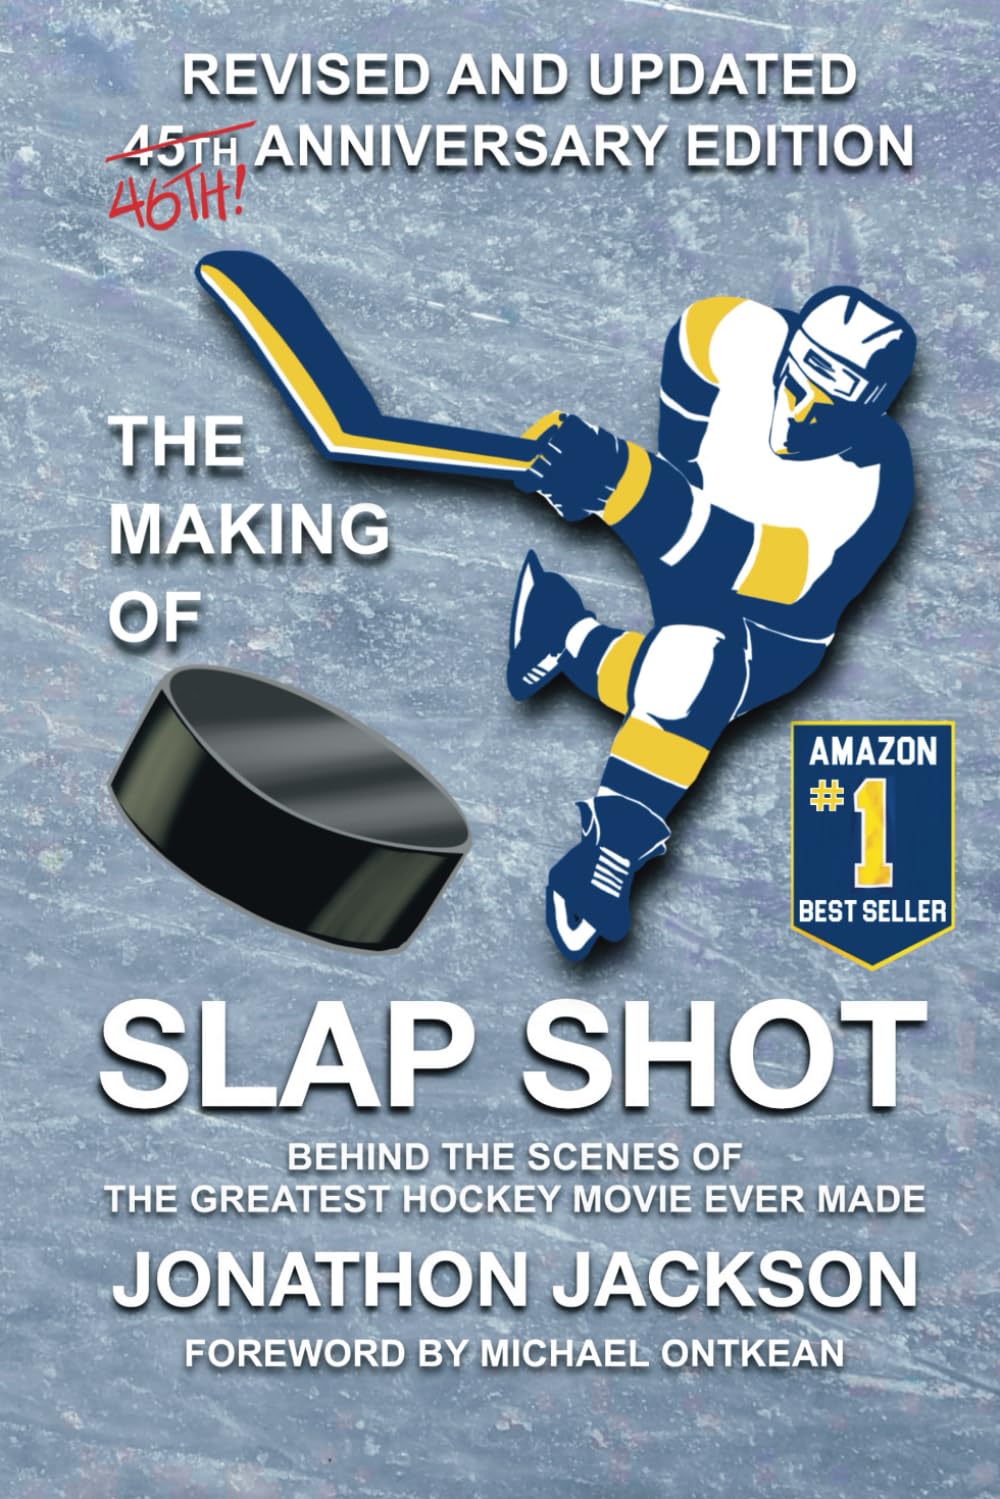 The Making of Slap Shot: Behind the Scenes of the Greatest Hockey Movie Ever Made